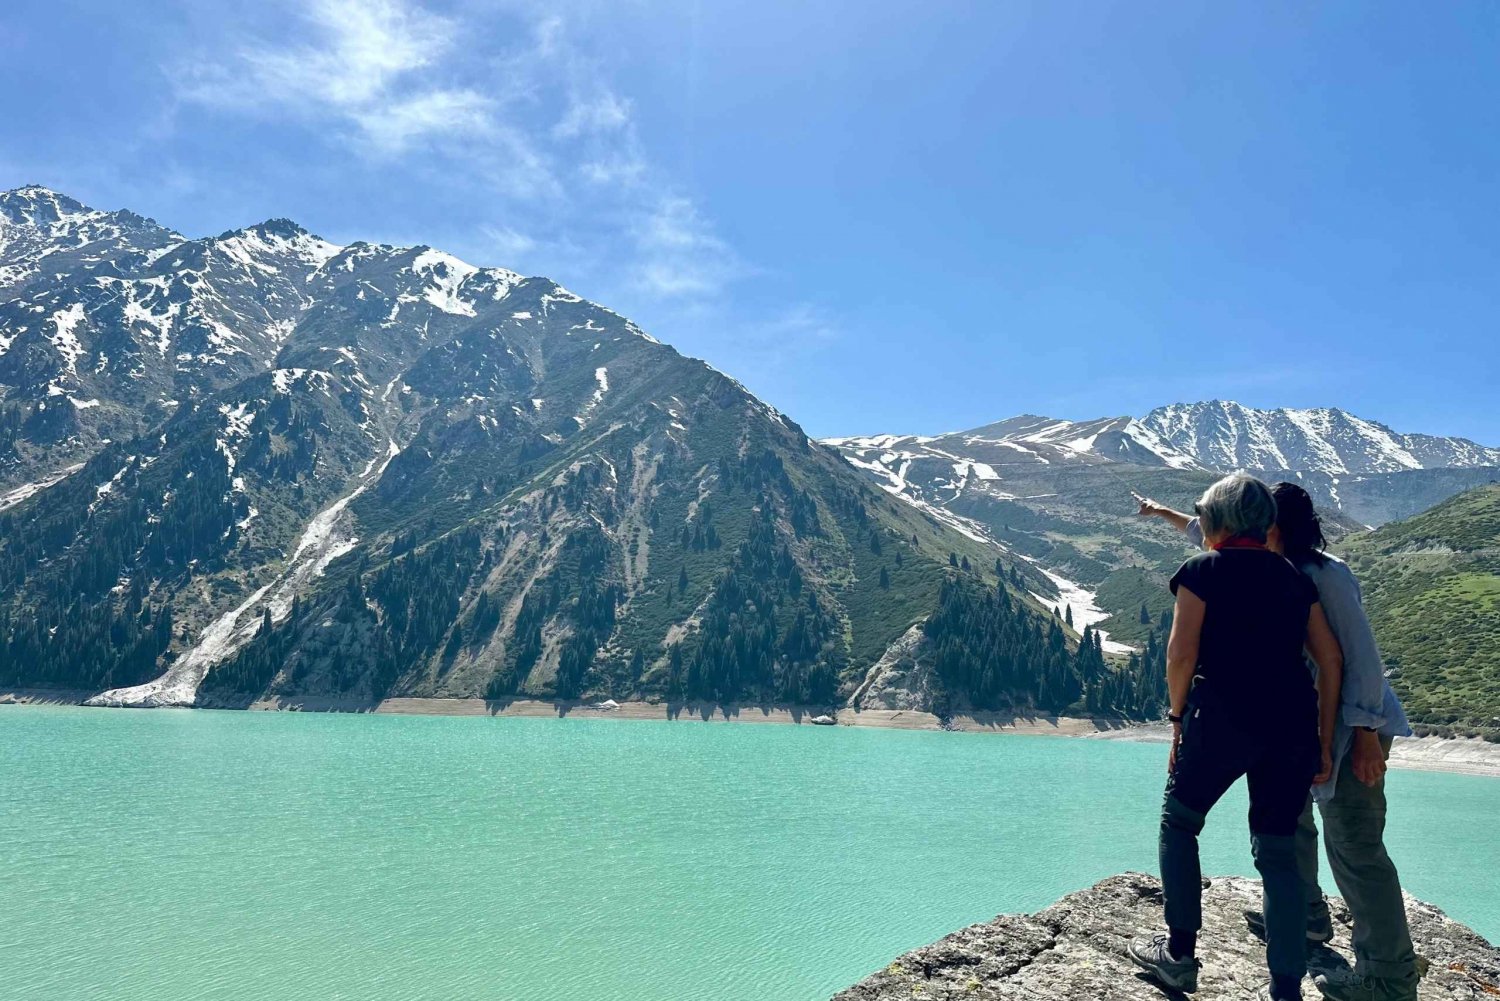 Big Almaty Lake: Choose Your Adventure on Foot or by Car